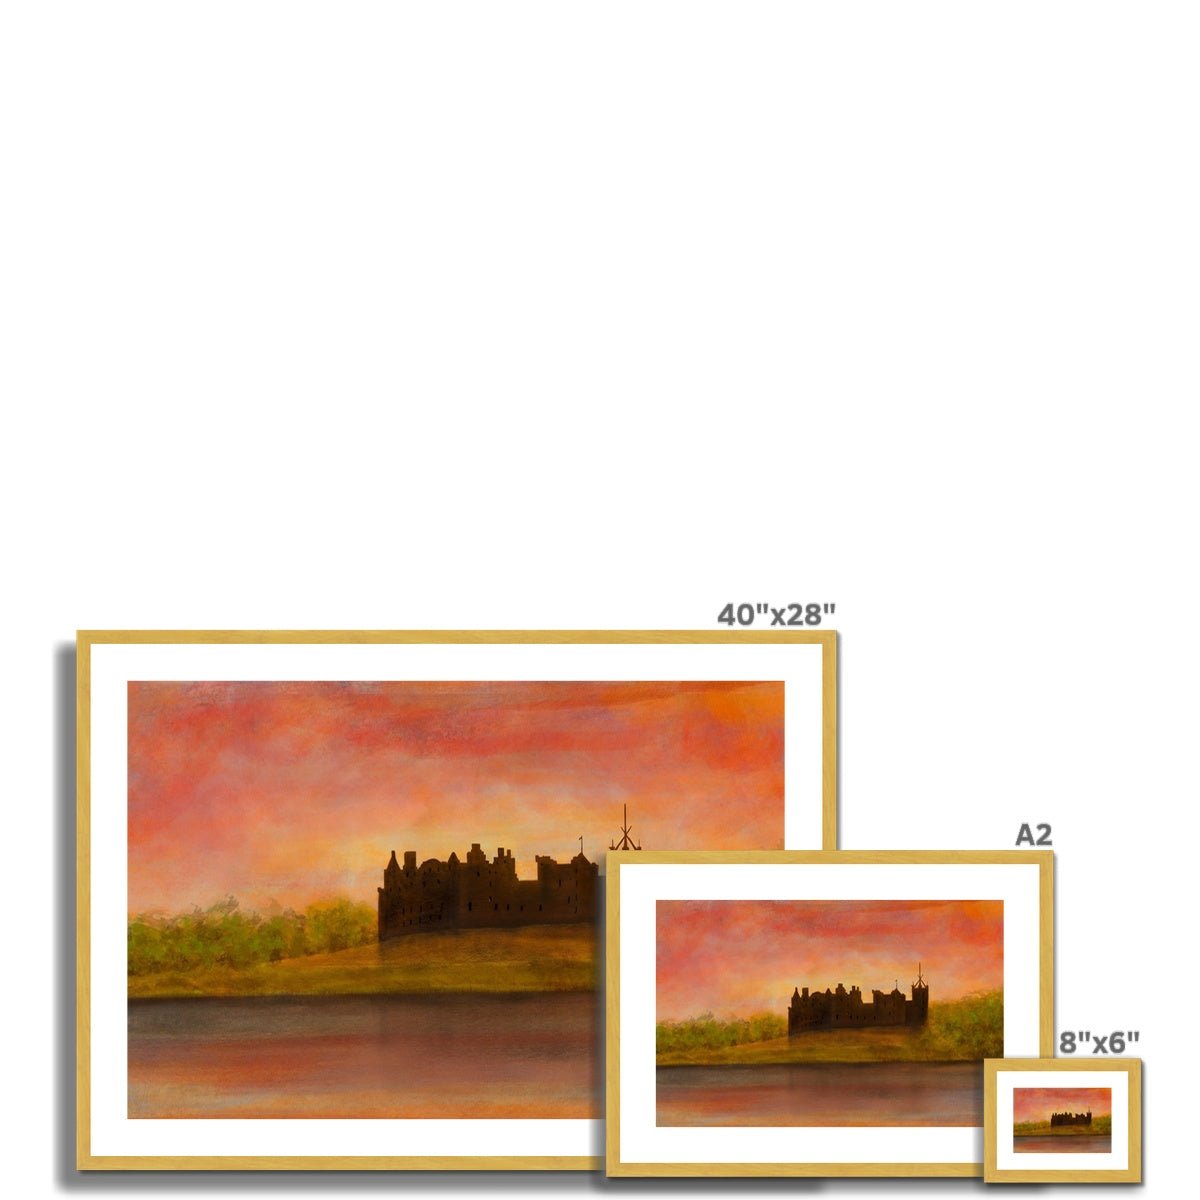 Linlithgow Palace Dusk Painting | Antique Framed & Mounted Prints From Scotland-Antique Framed & Mounted Prints-Historic & Iconic Scotland Art Gallery-Paintings, Prints, Homeware, Art Gifts From Scotland By Scottish Artist Kevin Hunter